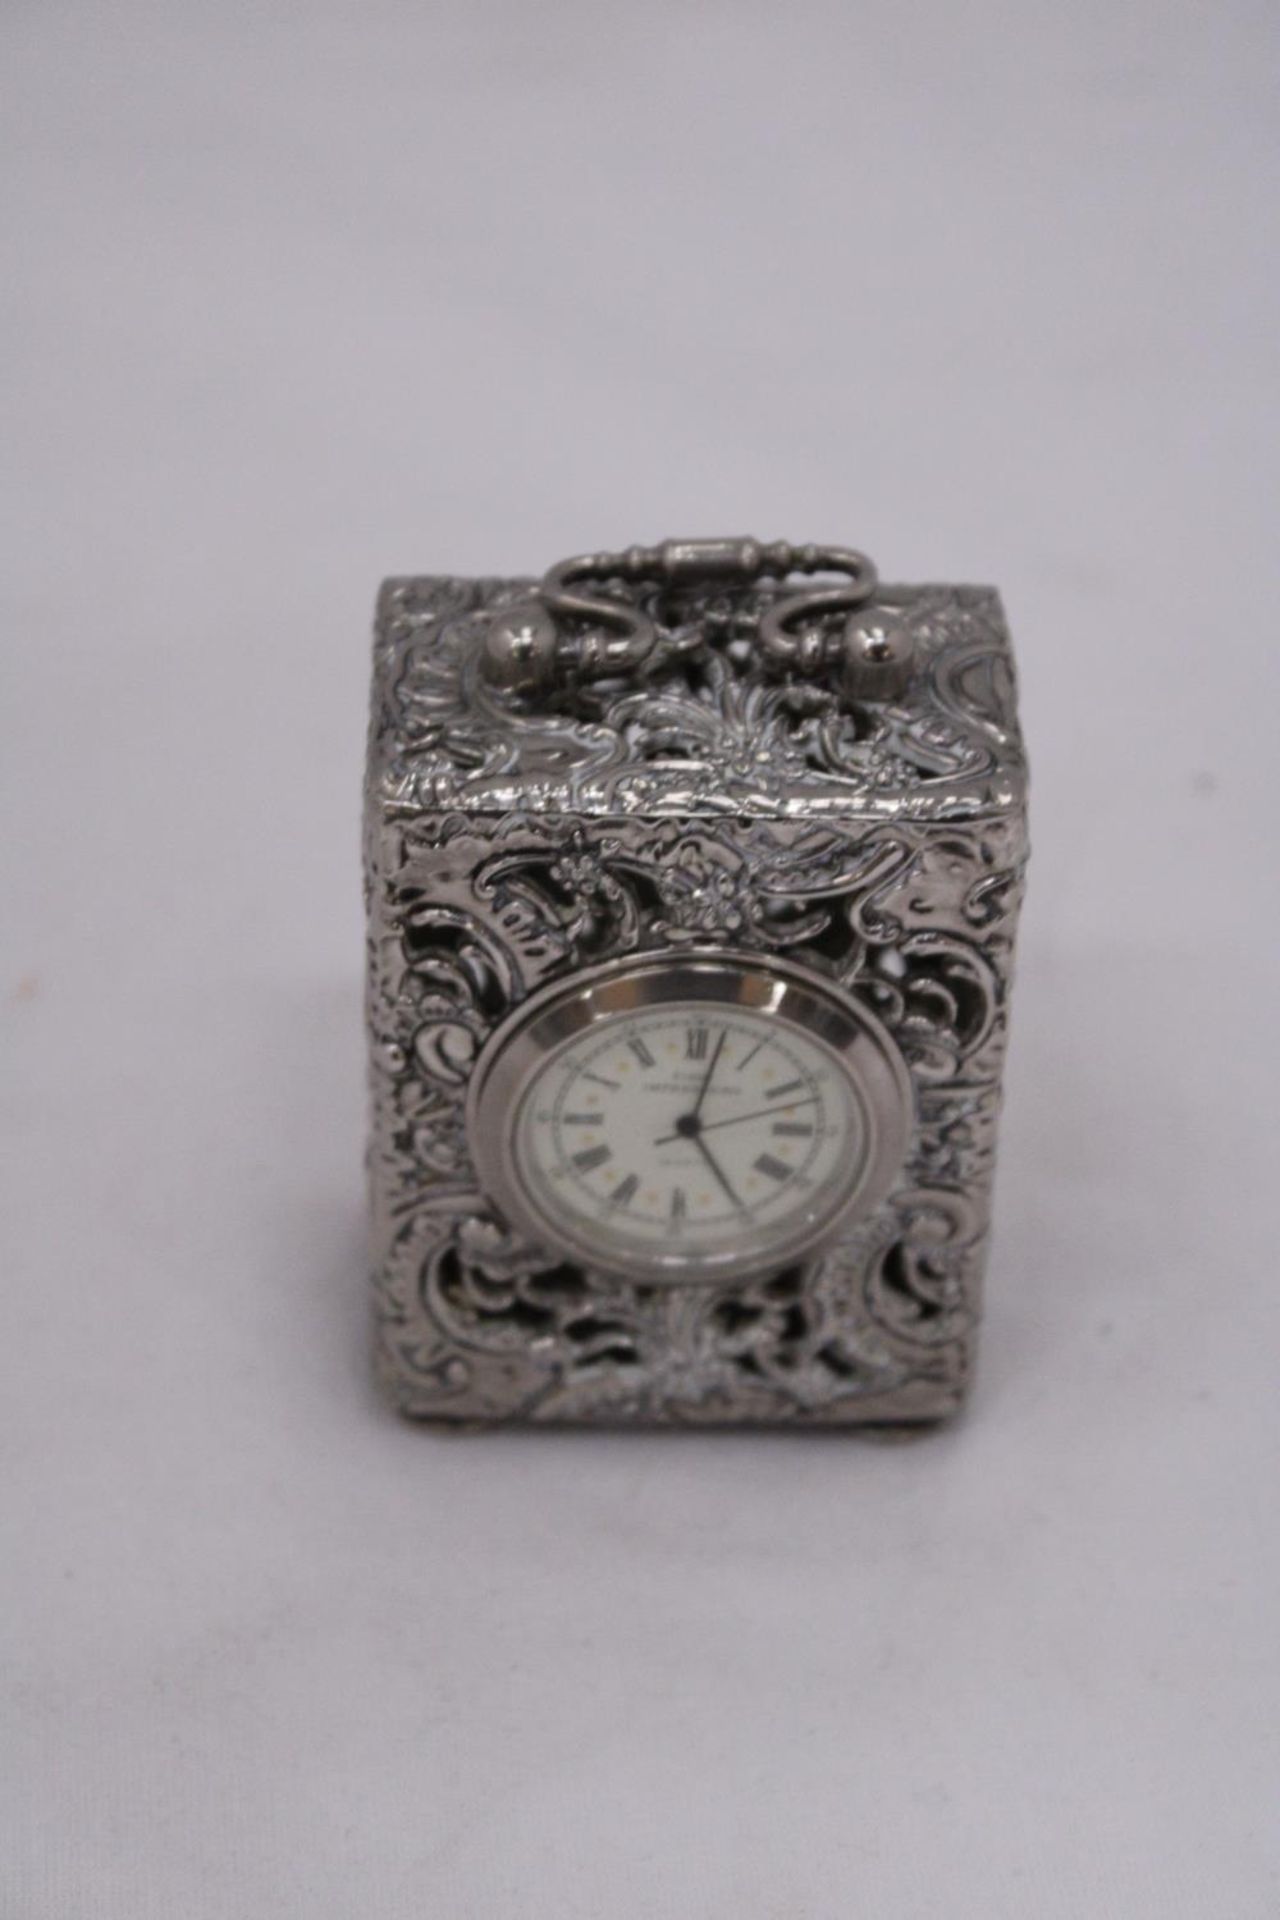 A SMALL VINTAGE WHITE METAL CARRIAGE CLOCK -APPROXIMATELY 7CM